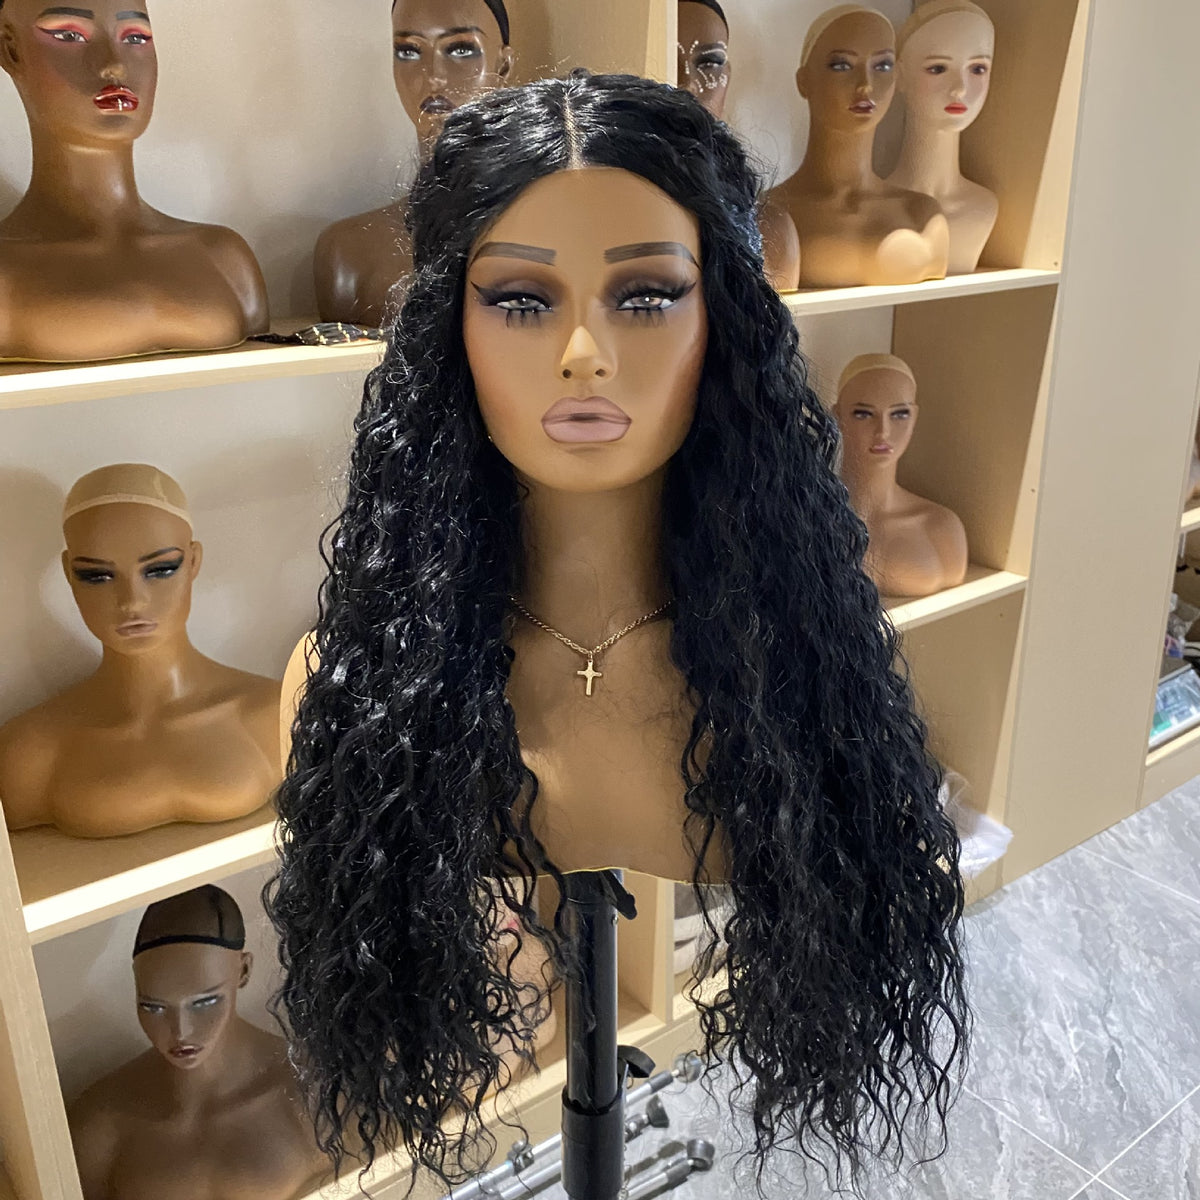 Head Bust Mannequin with Wig Accessories for Photoshoot